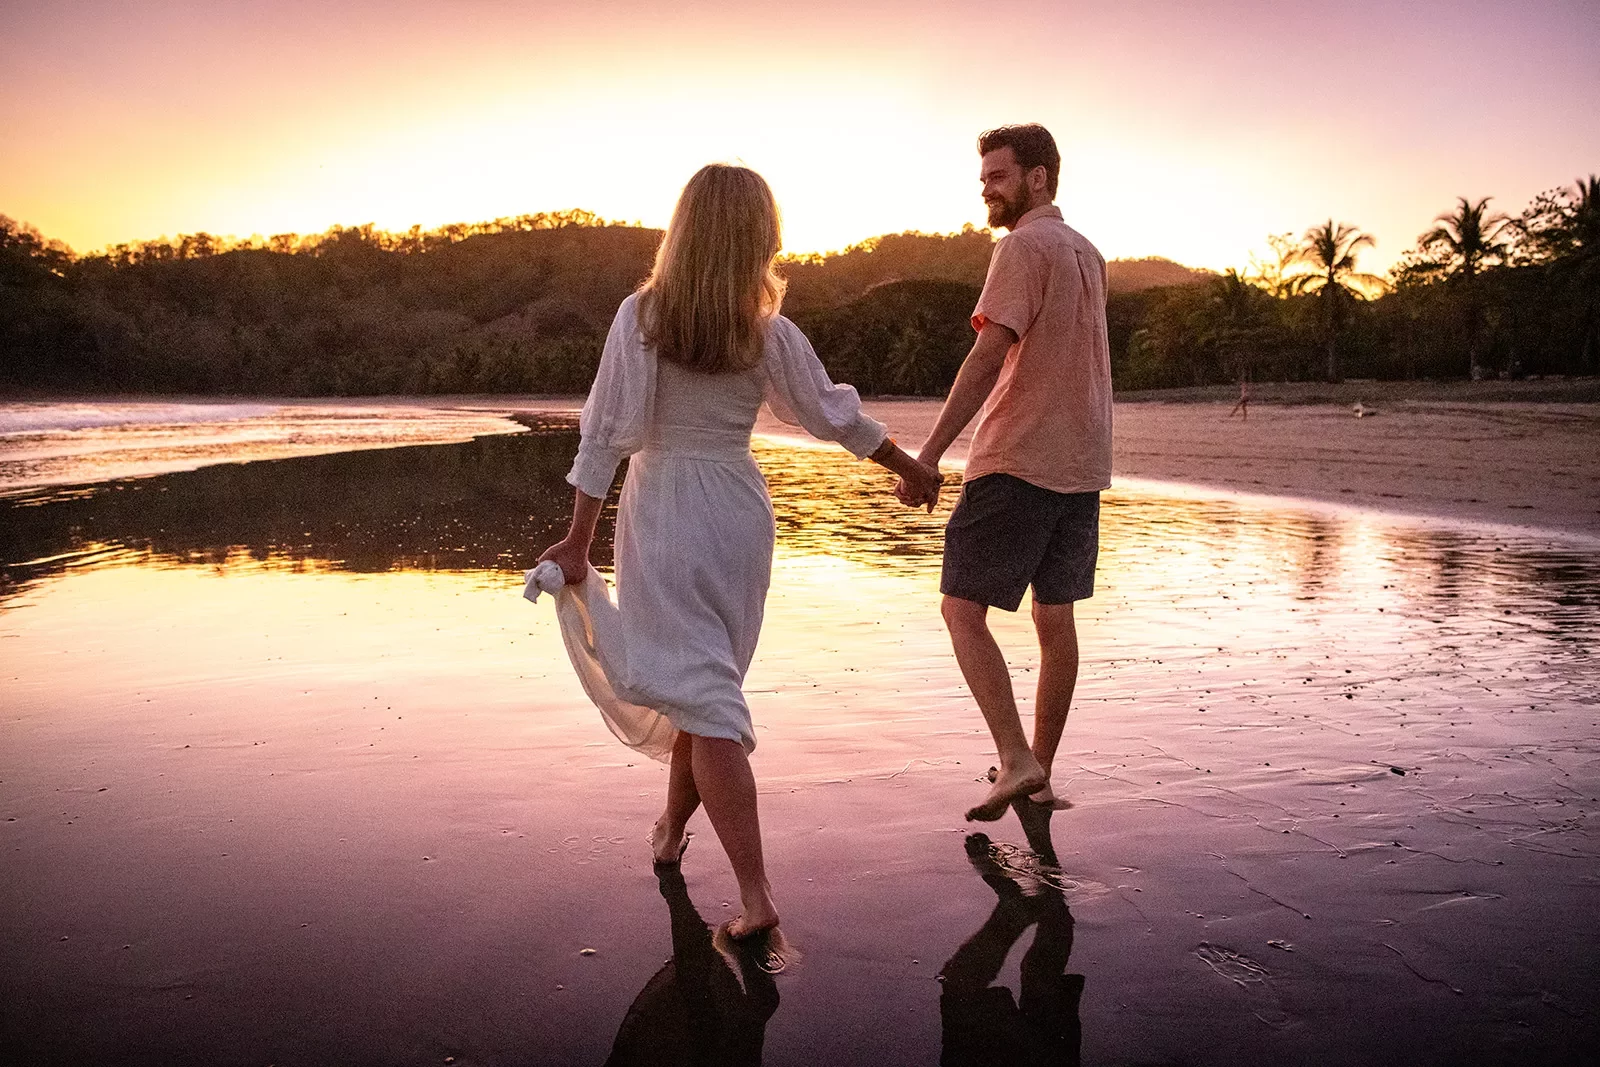 Two guests holding hands, walking along shore during sunset.